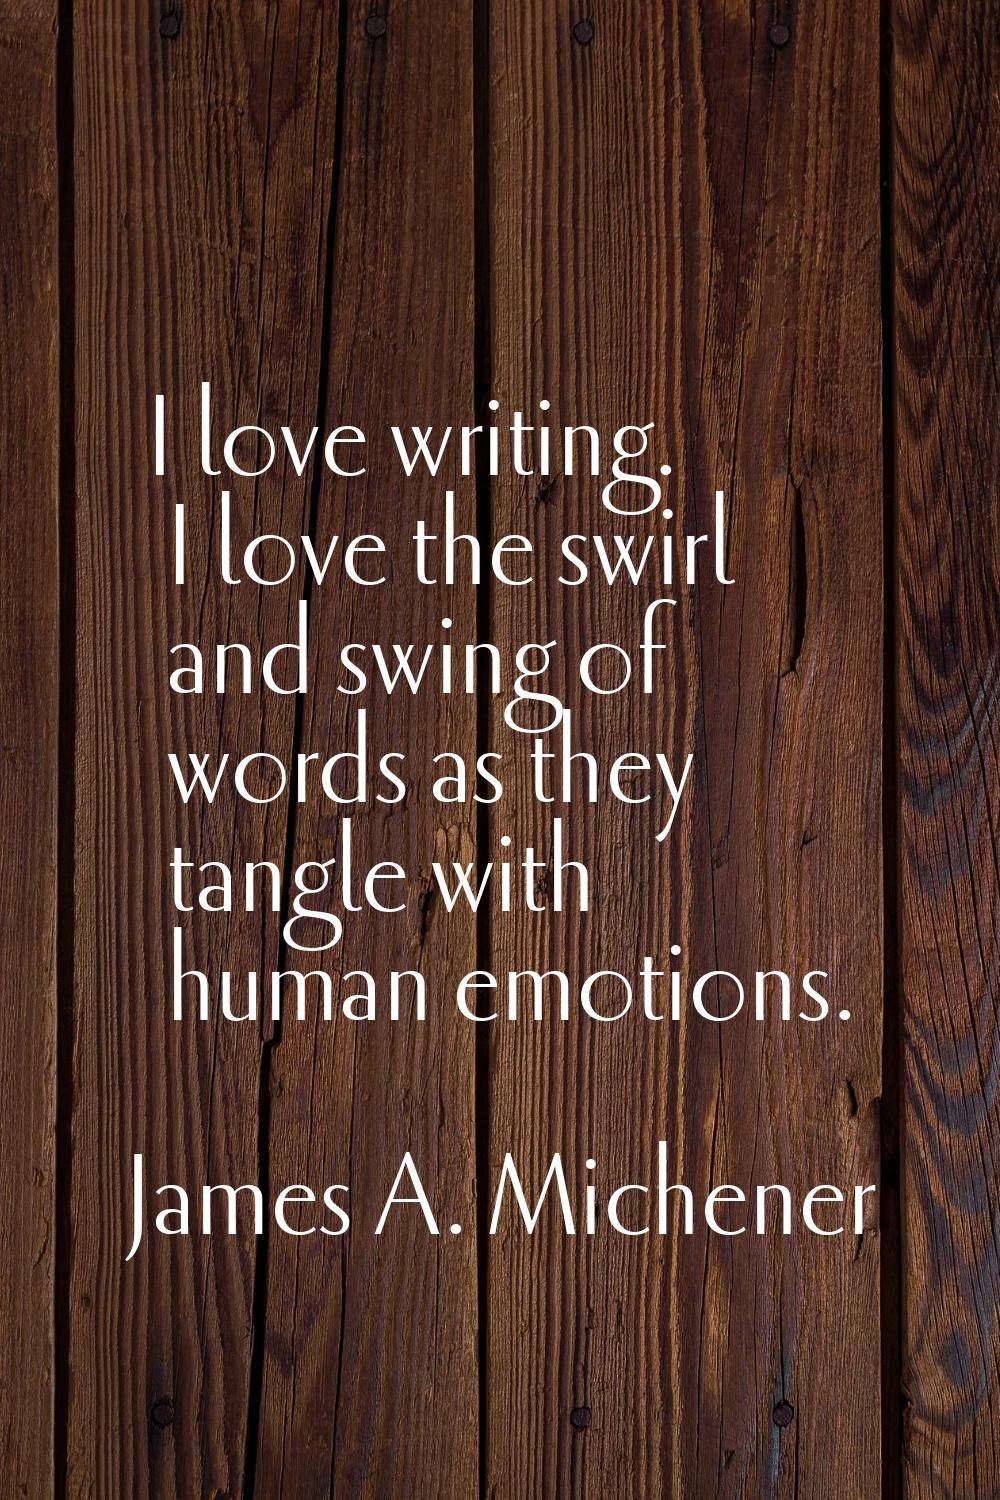 I love writing. I love the swirl and swing of words as they tangle with human emotions.